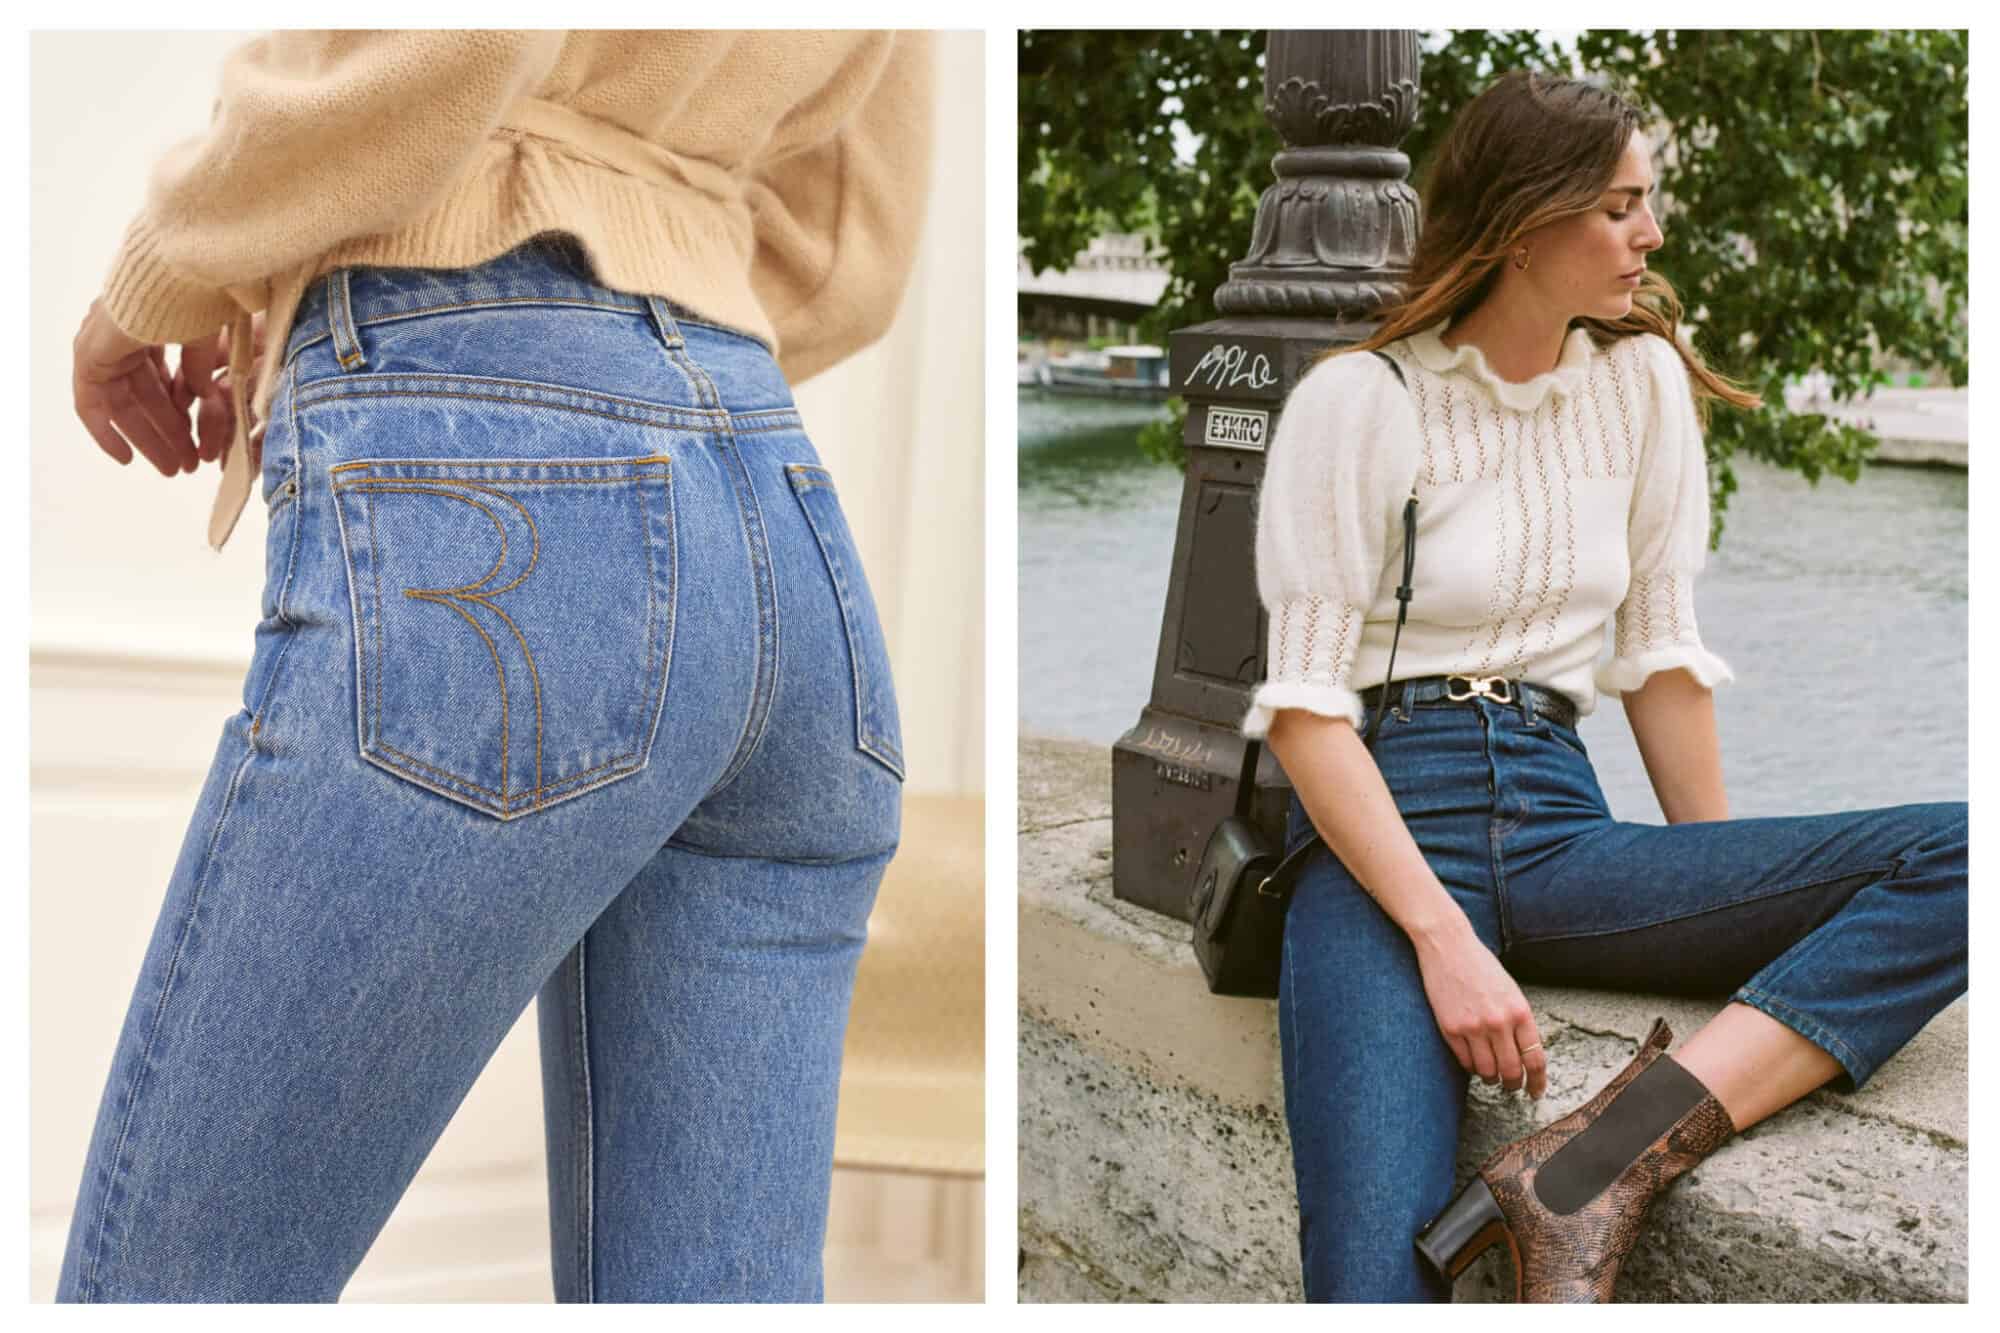 Right: a model's backside dressed in light blue jeans and a peach sweater.
Left: a woman with long brown hair sits along the Seine in front of a lamppost dressed in blue jeans, a ruffled cream coloured shirt, and a small black hand bag on her shoulder.